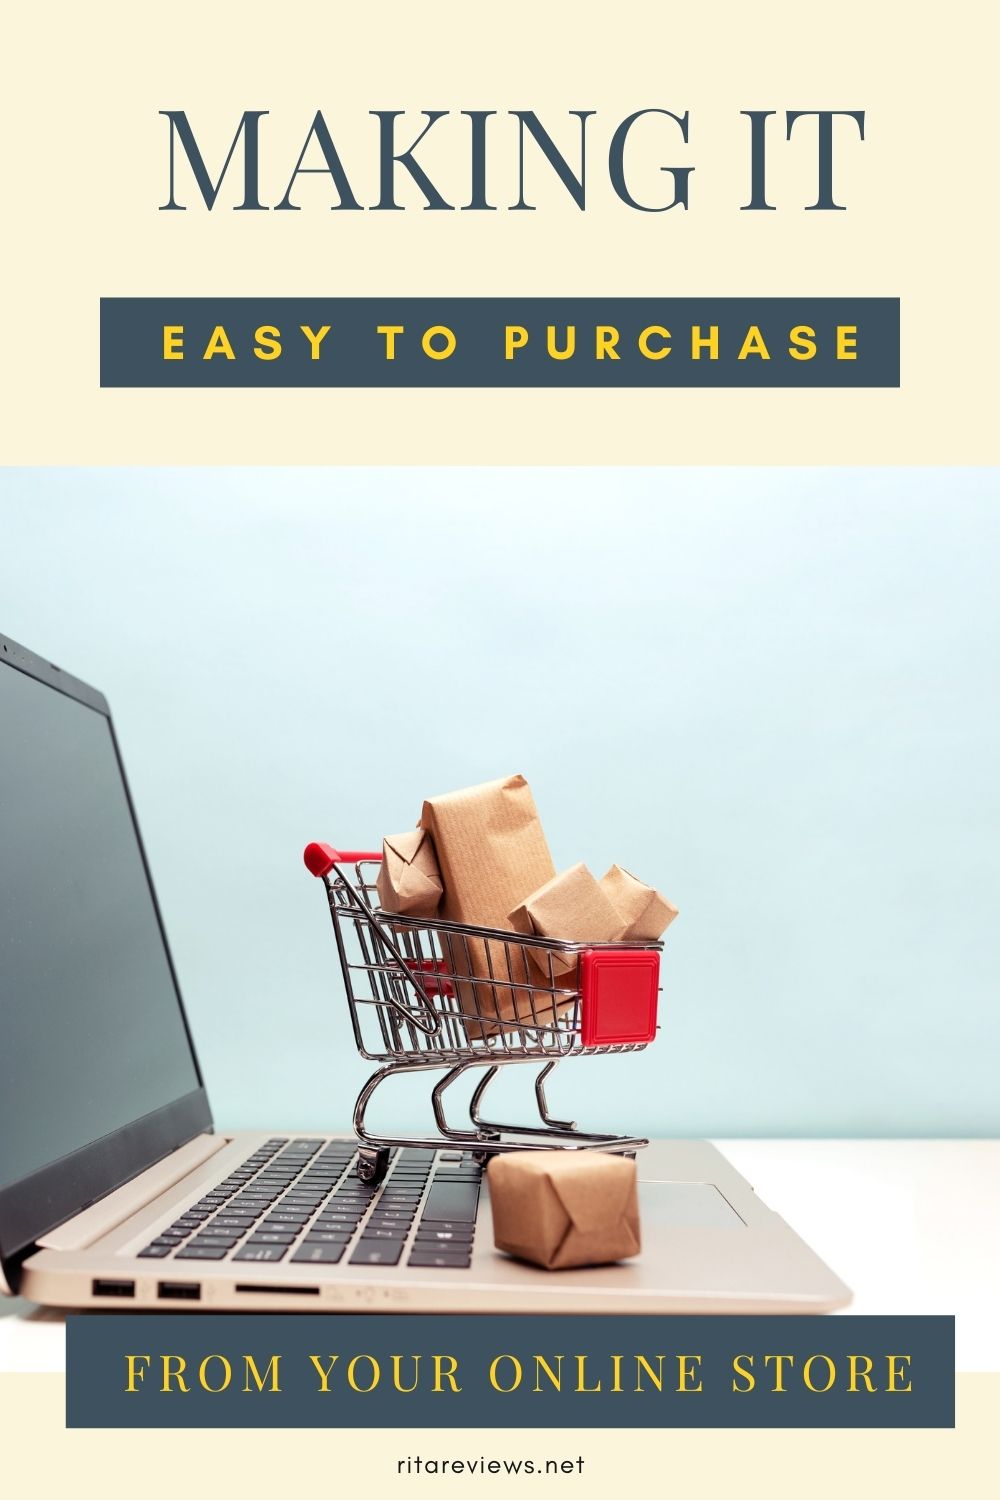 Making It Easy to Purchase from Your Online Store